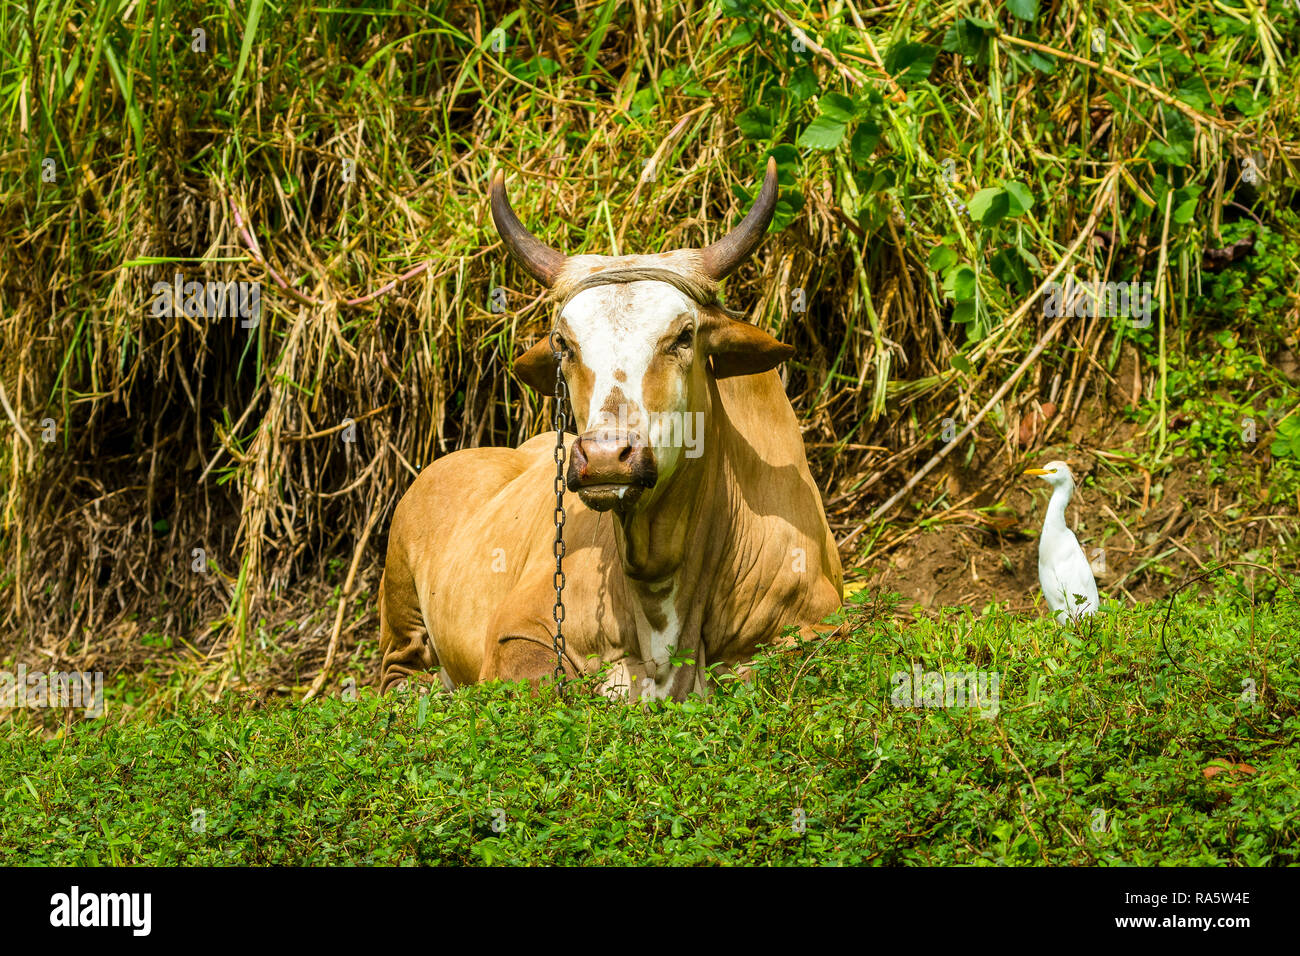 Tobago culture and animal welfare.  Large, horned cow, chained to a stake and lying down in the Rain Forest with a white Egret bird to the right. Stock Photo